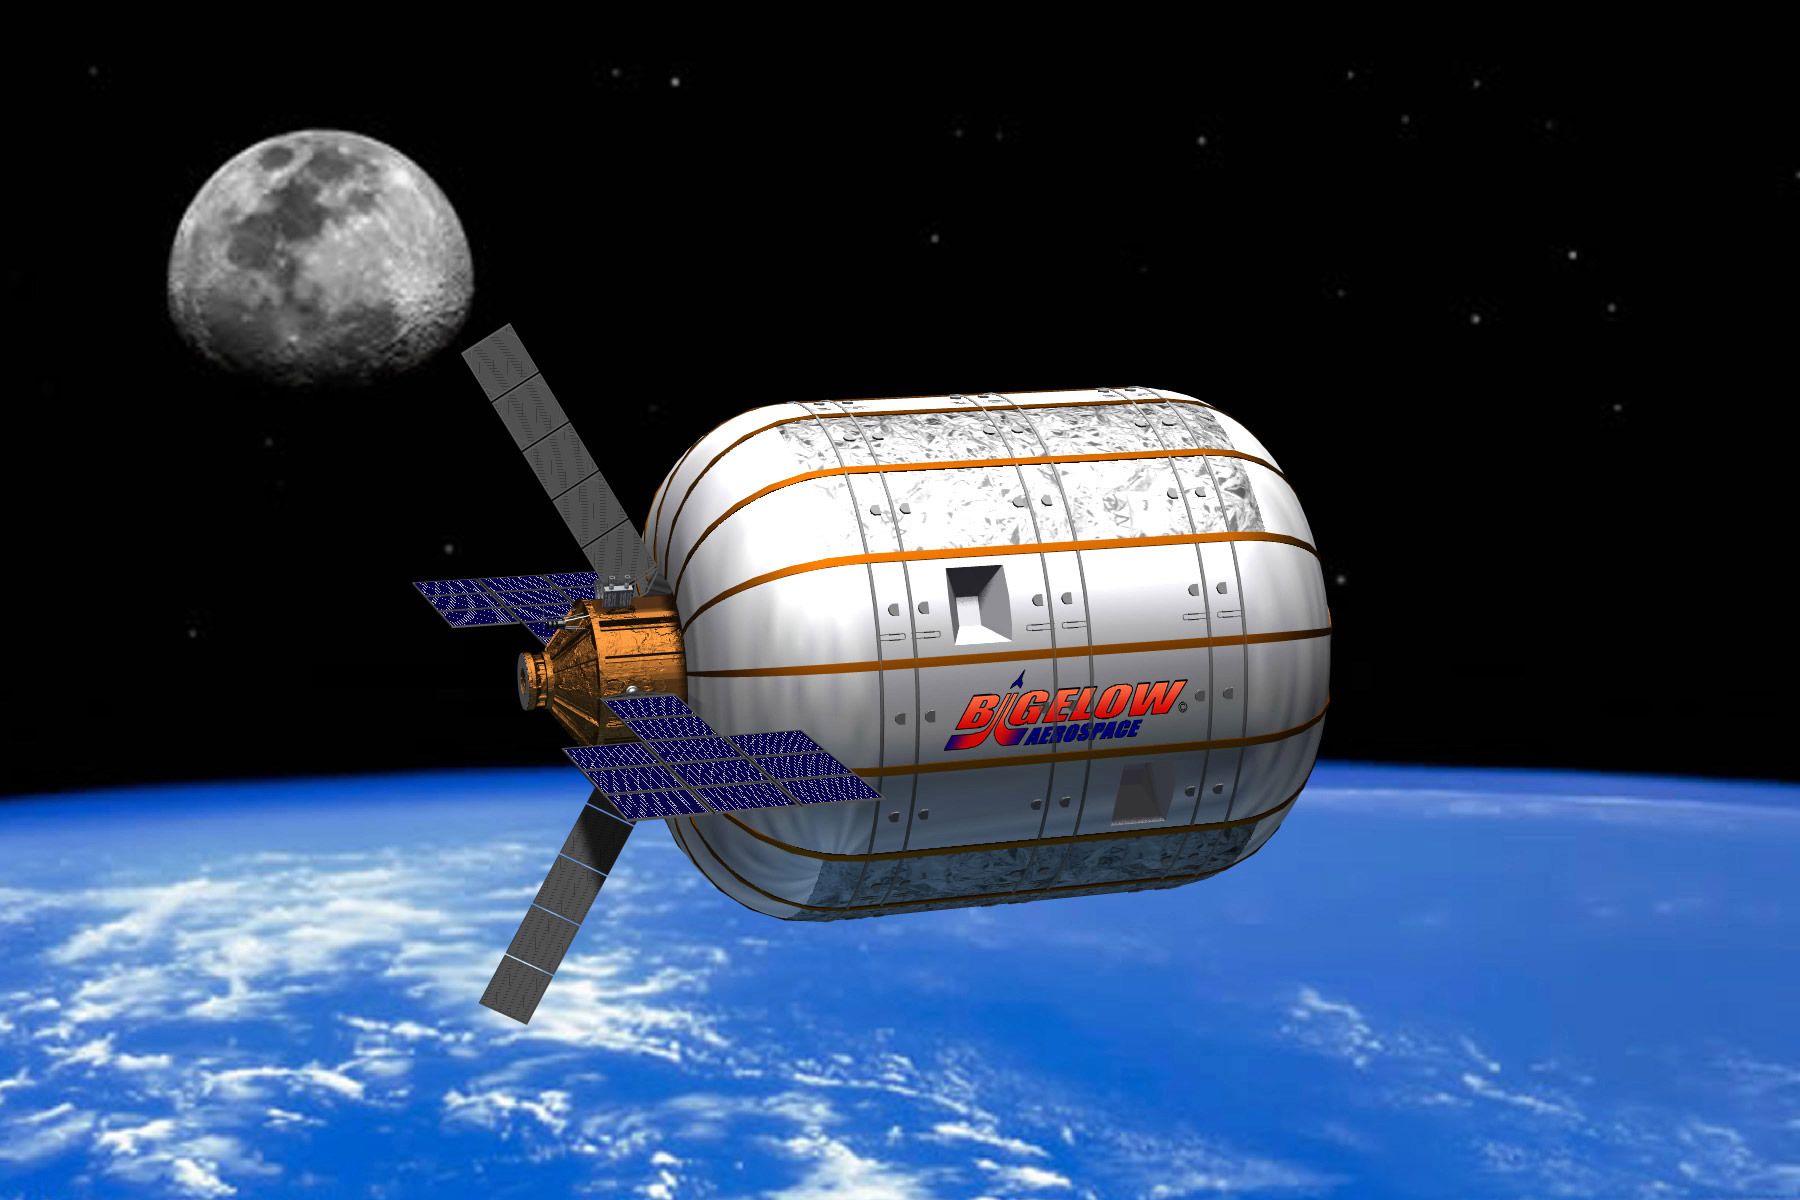 Bigelow’s inflatatable modules may one day make it affordable for corporations to build their own stations. Images: Bigelow Aerospace